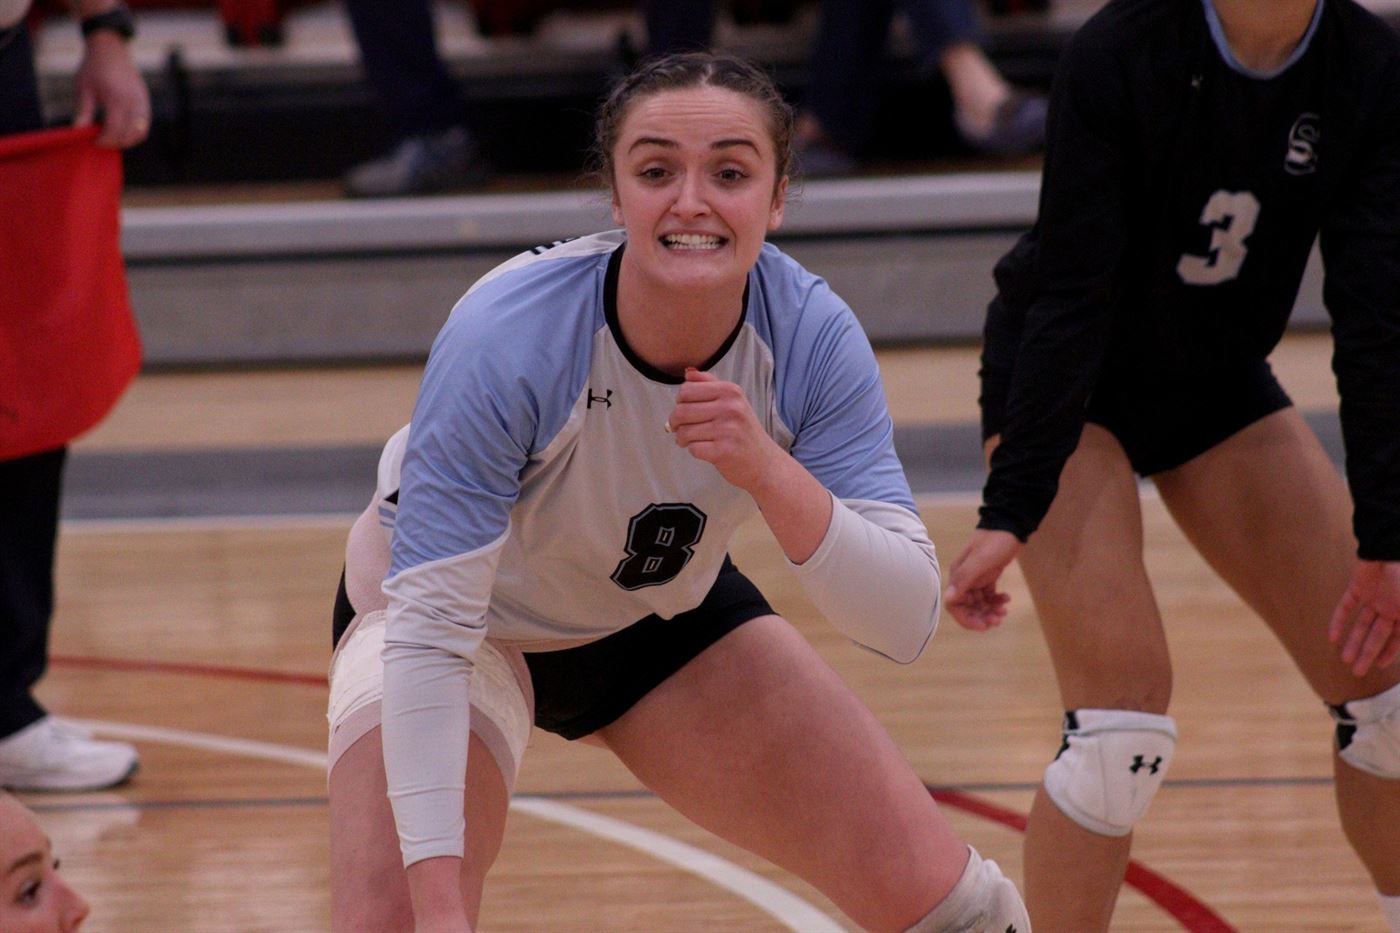 Defensive specialist Sophia Marziello during the playoff game. John LaRosa | The Montclarion